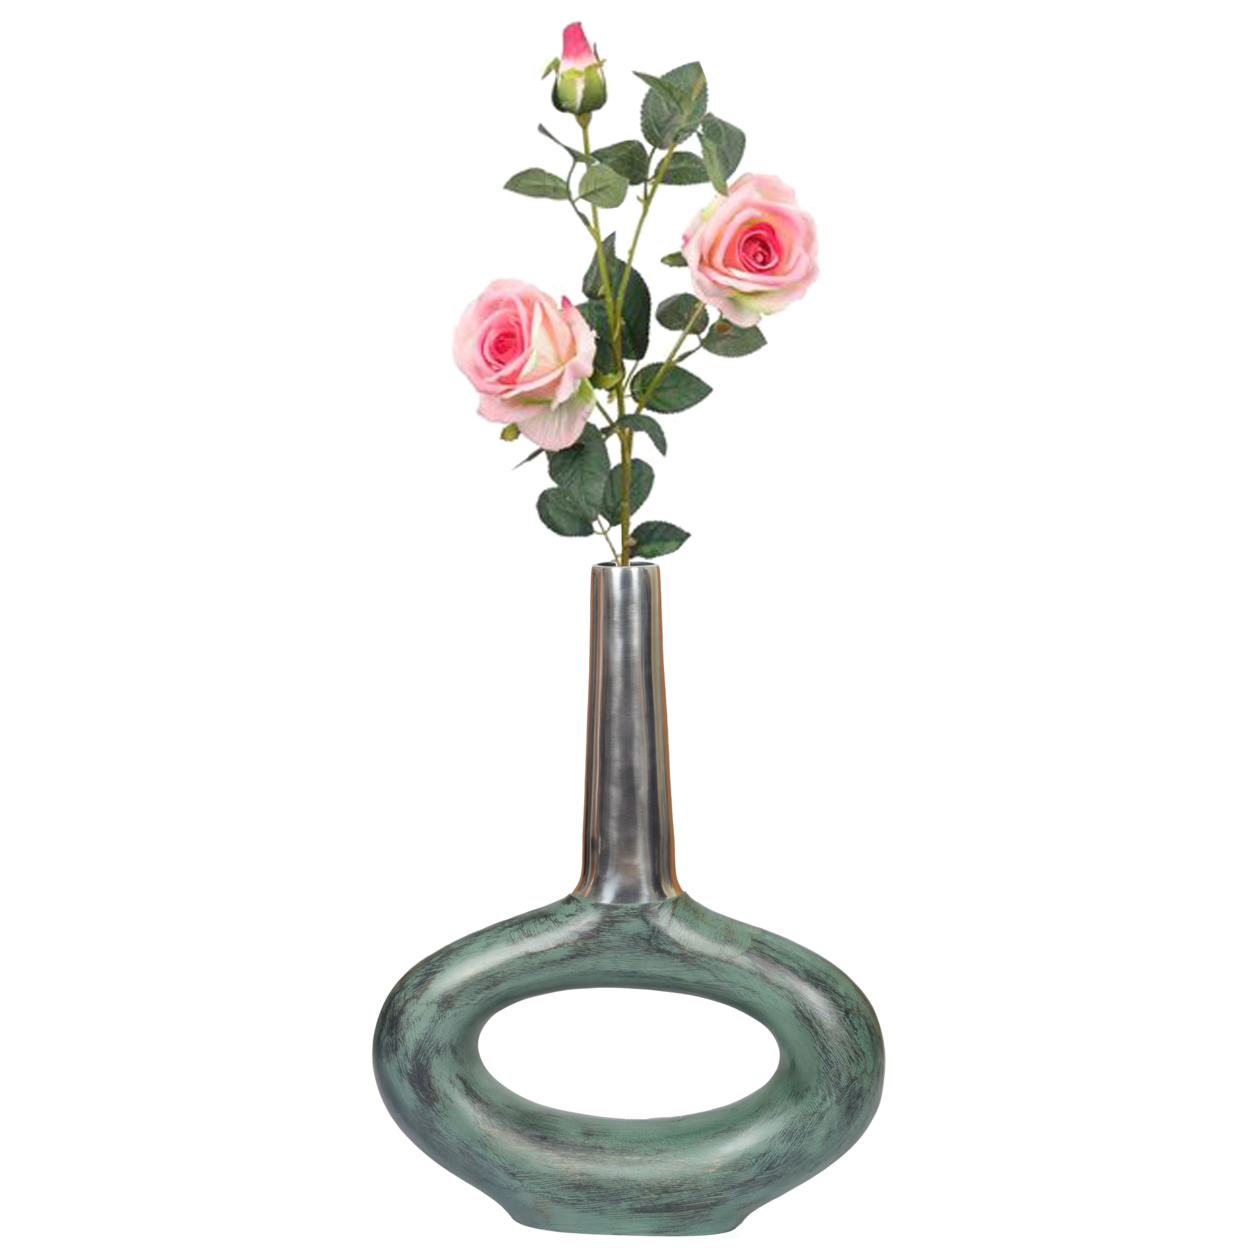 Decorative Antique Aluminium-Casted Table Centerpiece Flower Vase, Two Tone Patina Green 19.25 Inch